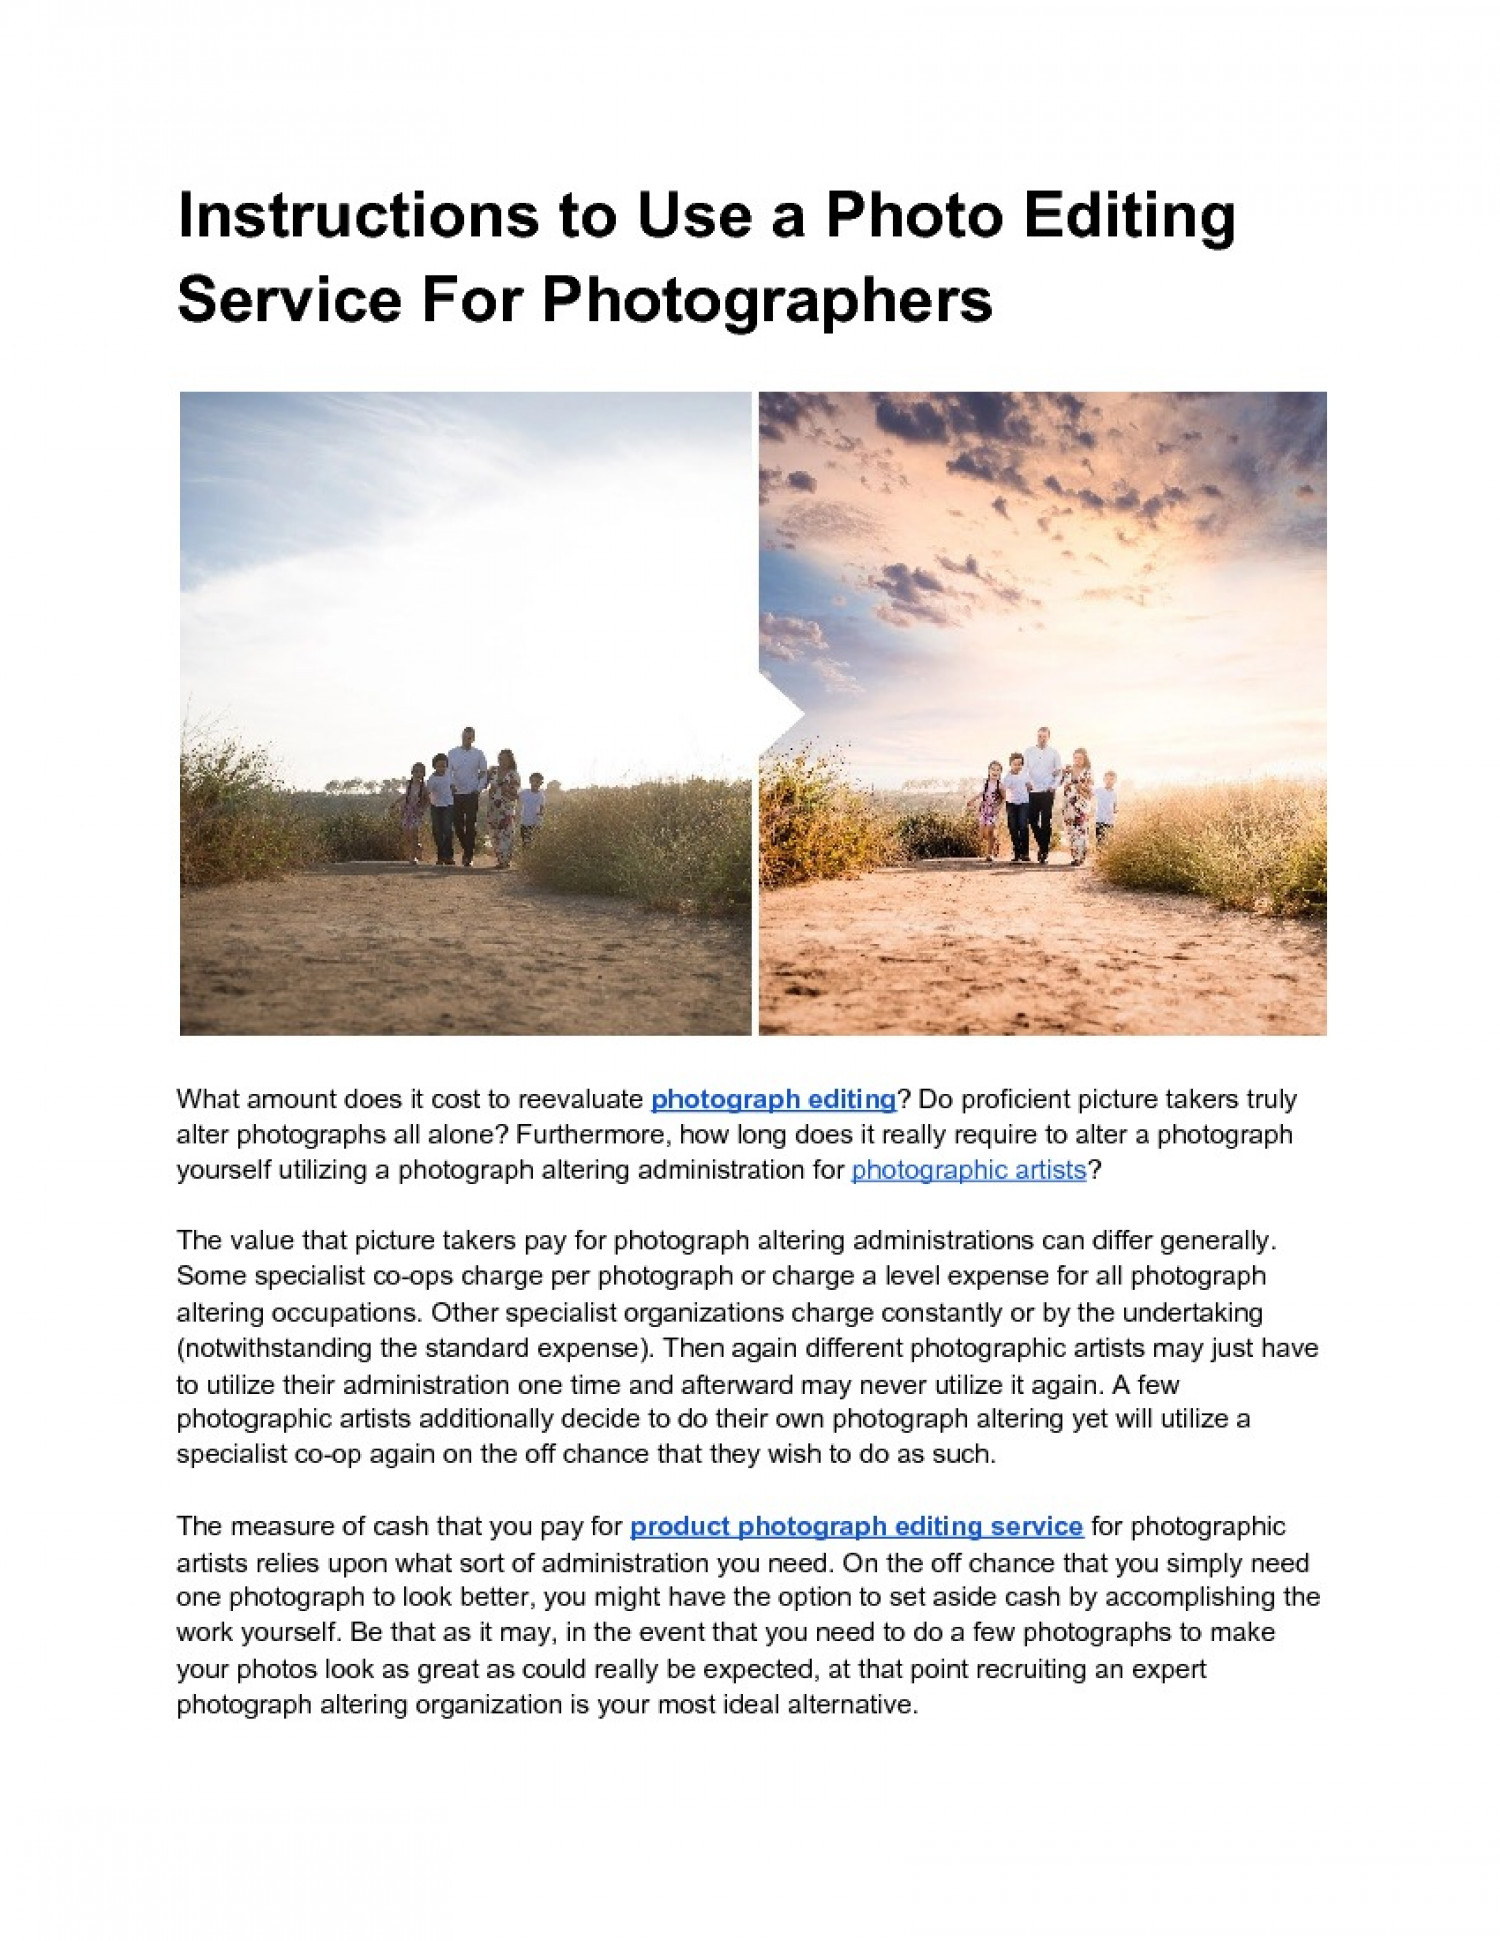 Instructions to Use a Photo Editing Service For Photographers Infographic